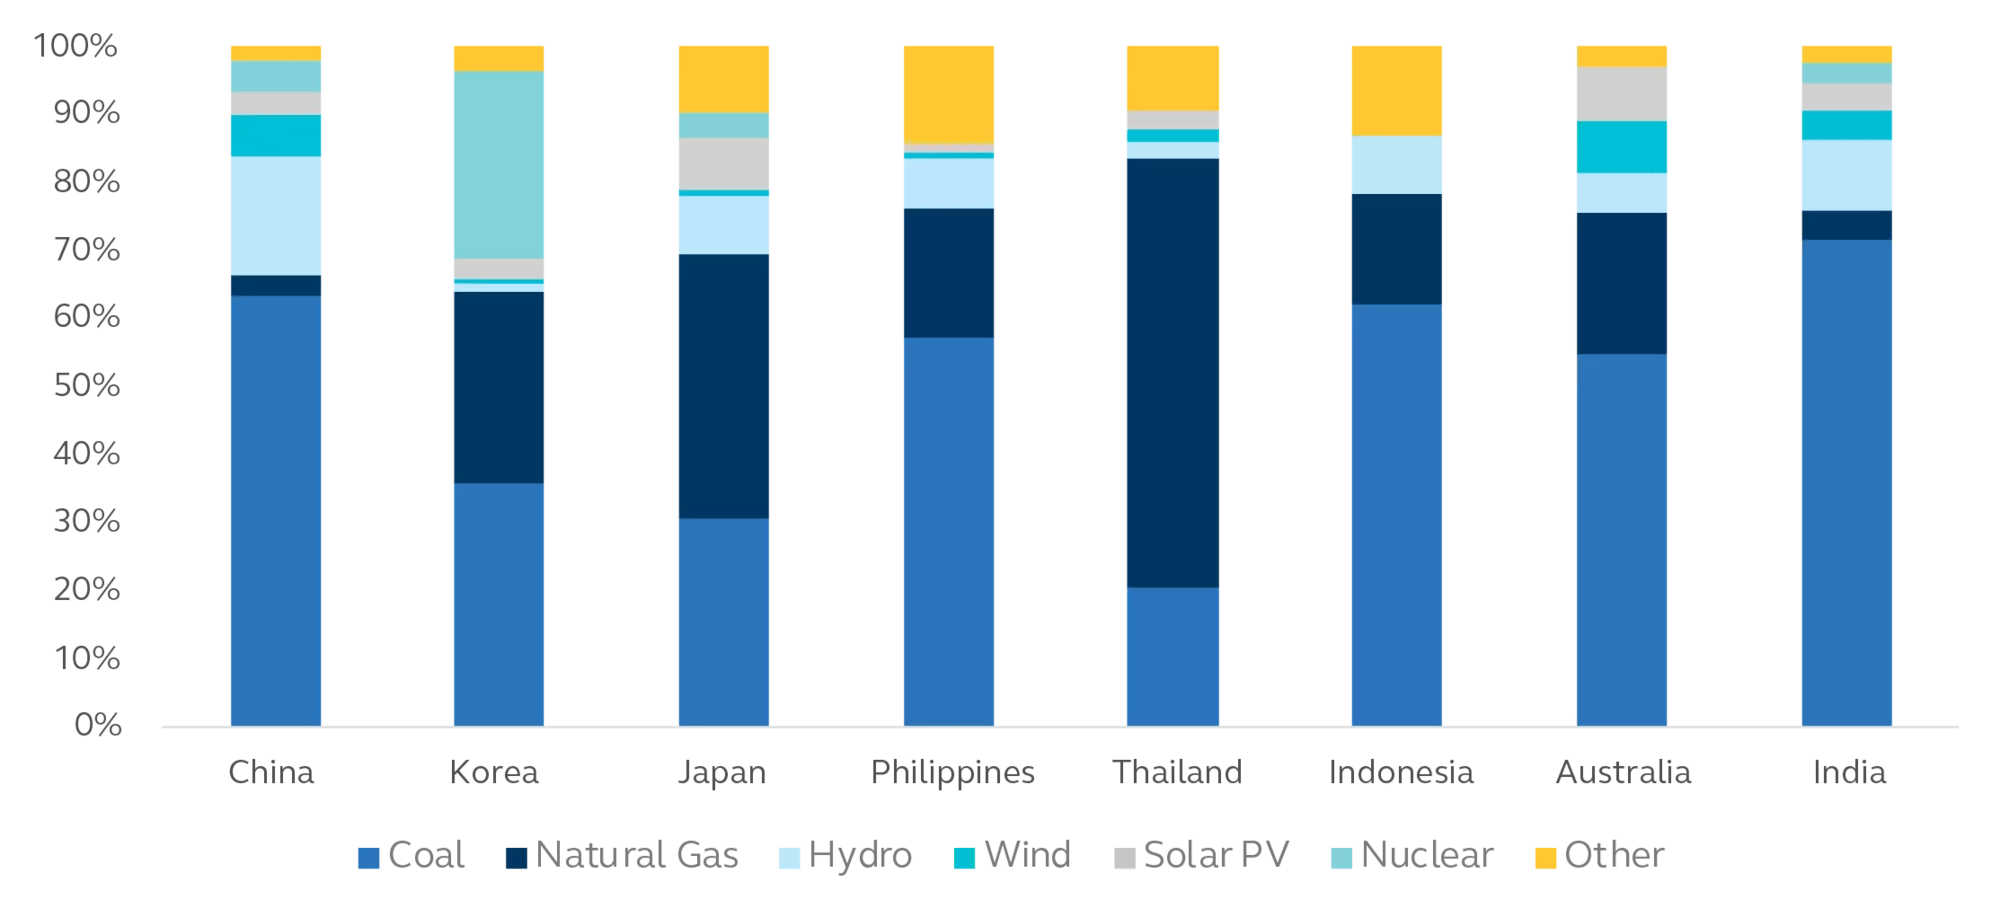 Stacked bar graph showing power generation mix in Asian countries as of 2020